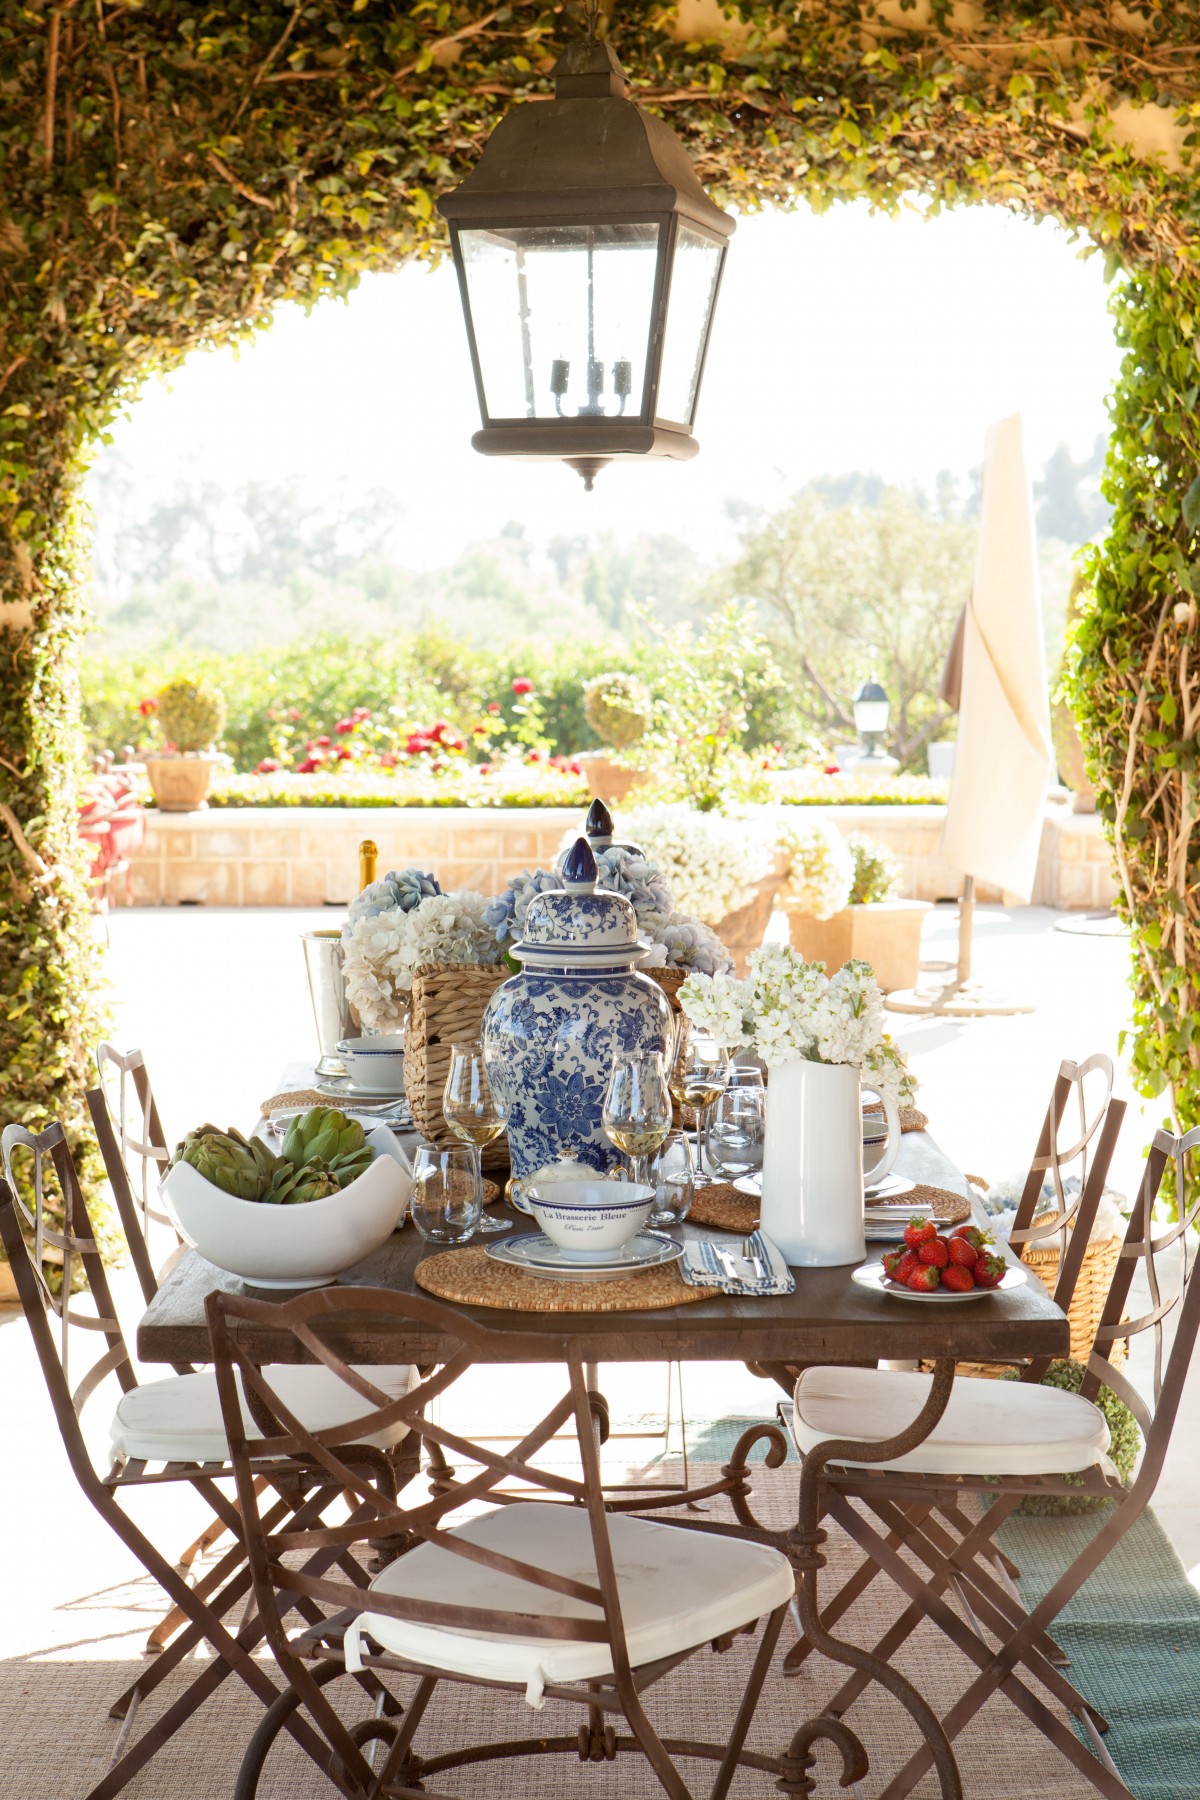 The home of designer Jennifer Amodei, located outside Santa Barbara in Somis, California, is a mix of California, French, and Italian influences.